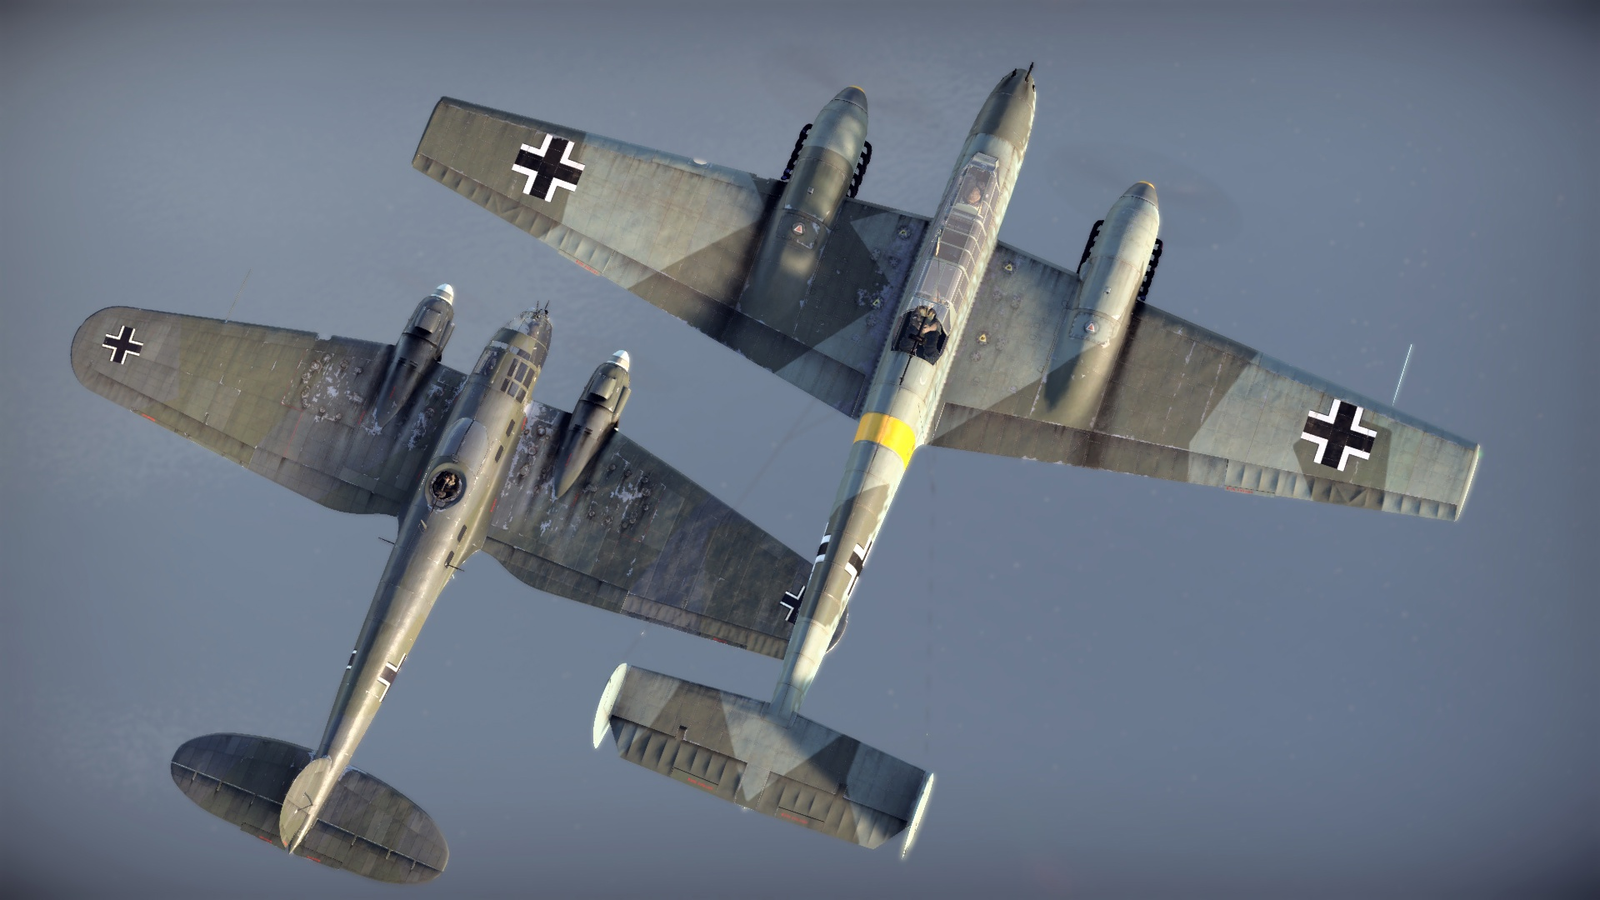 War Thunder players leaking military documents on game forums (again) -  ReadWrite